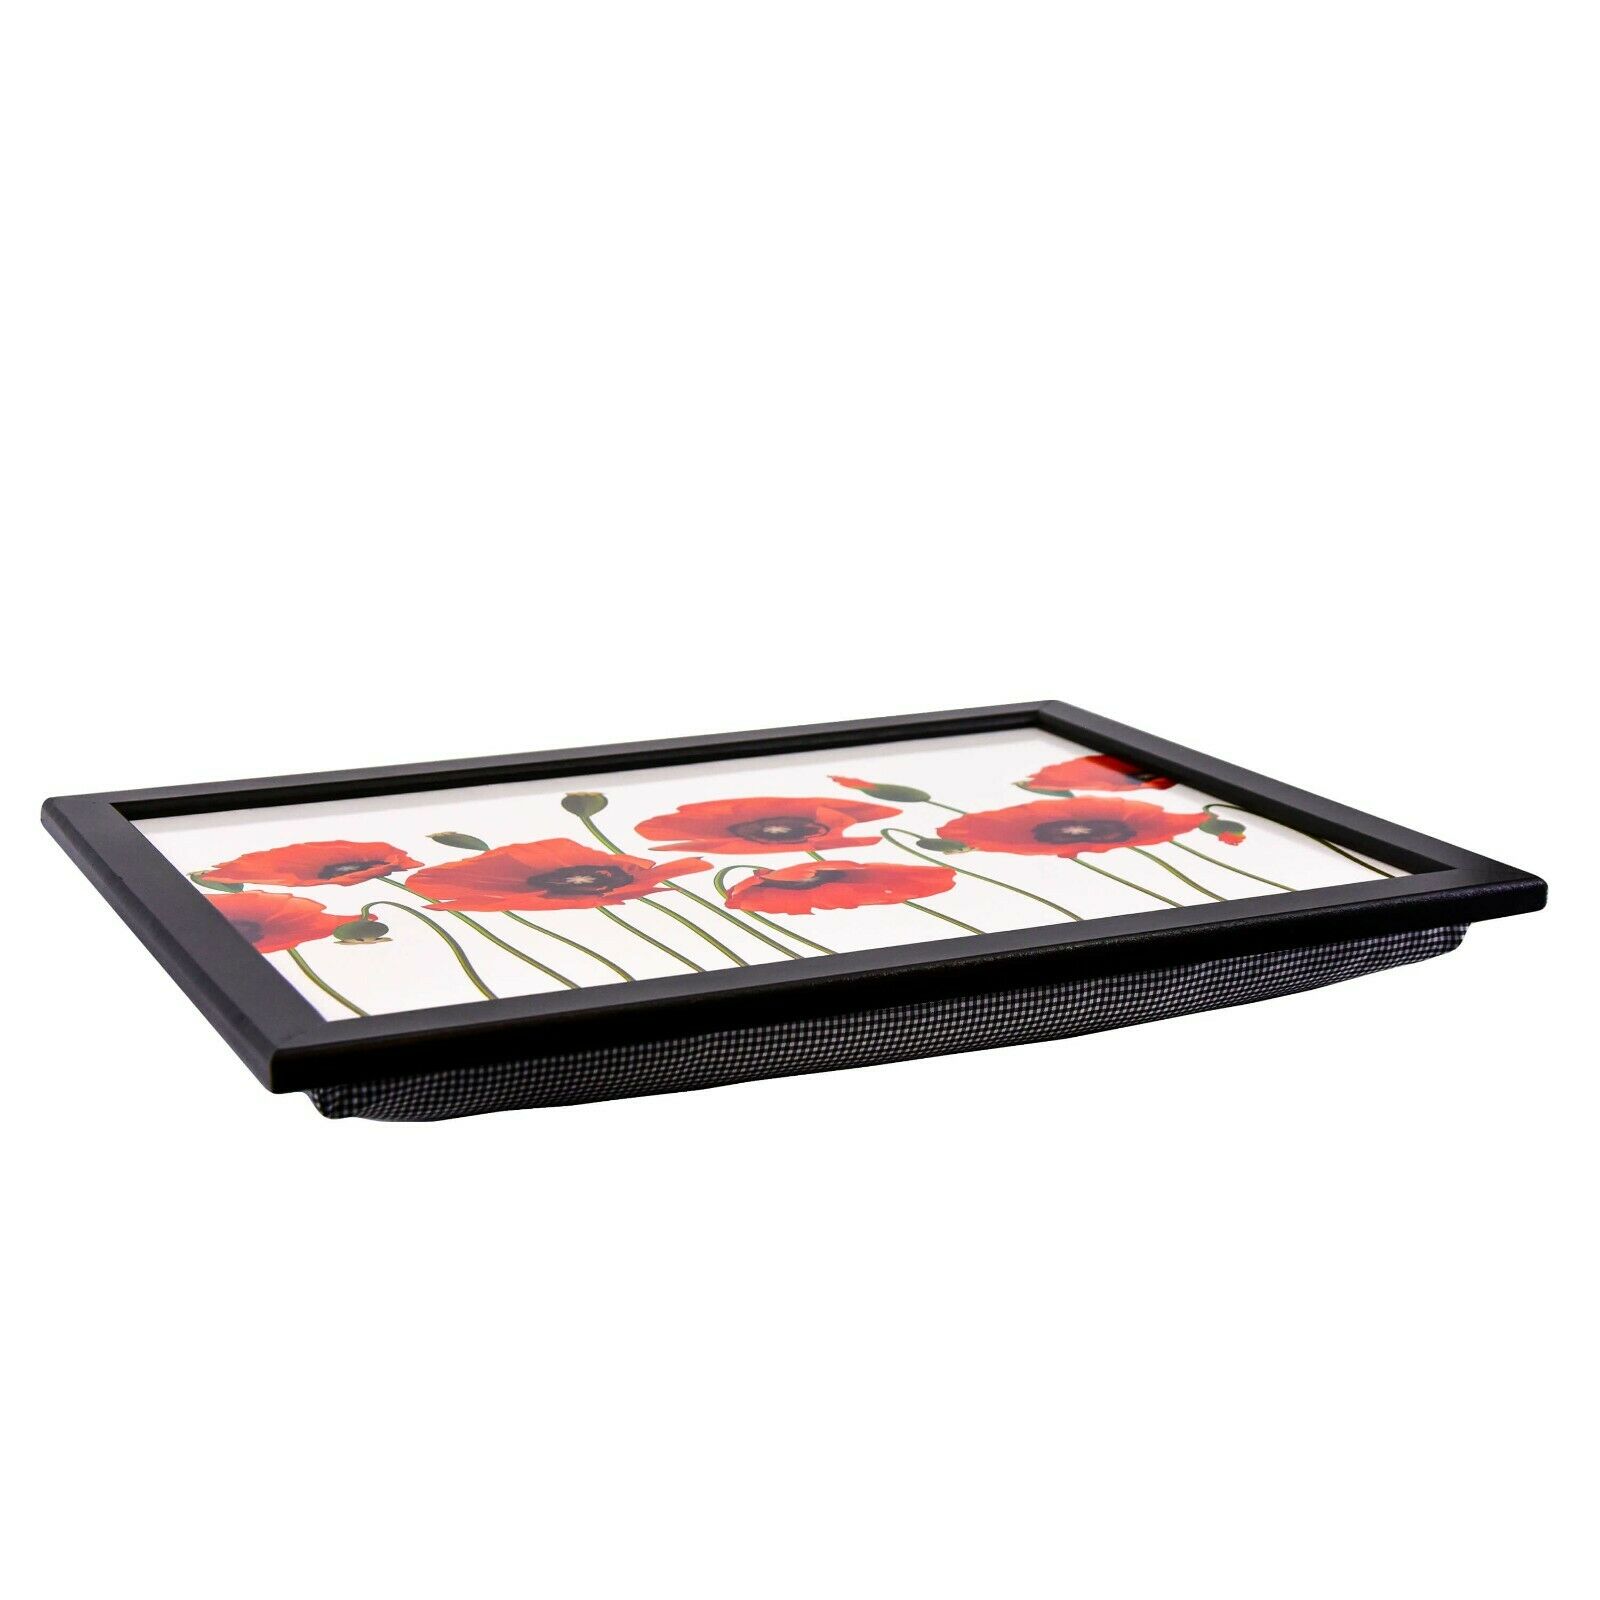 Poppies Lap Tray With Bean Bag Cushion The Magic Toy Shop - The Magic Toy Shop